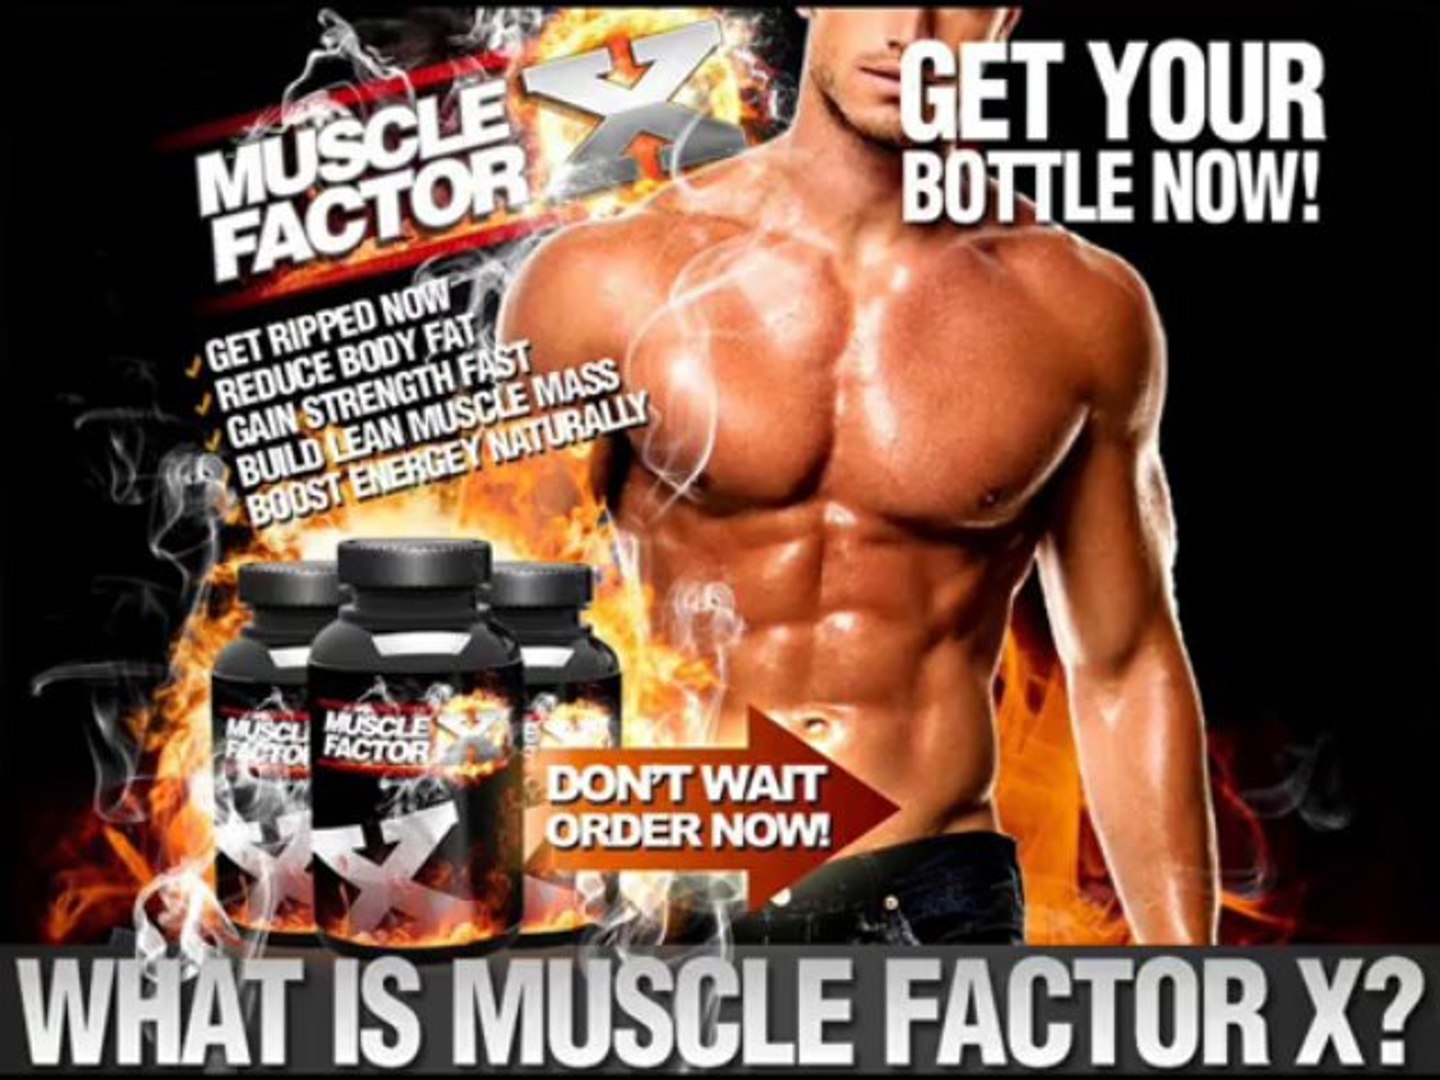 Muscle Factor X Review - Get Your Dream Physique Today